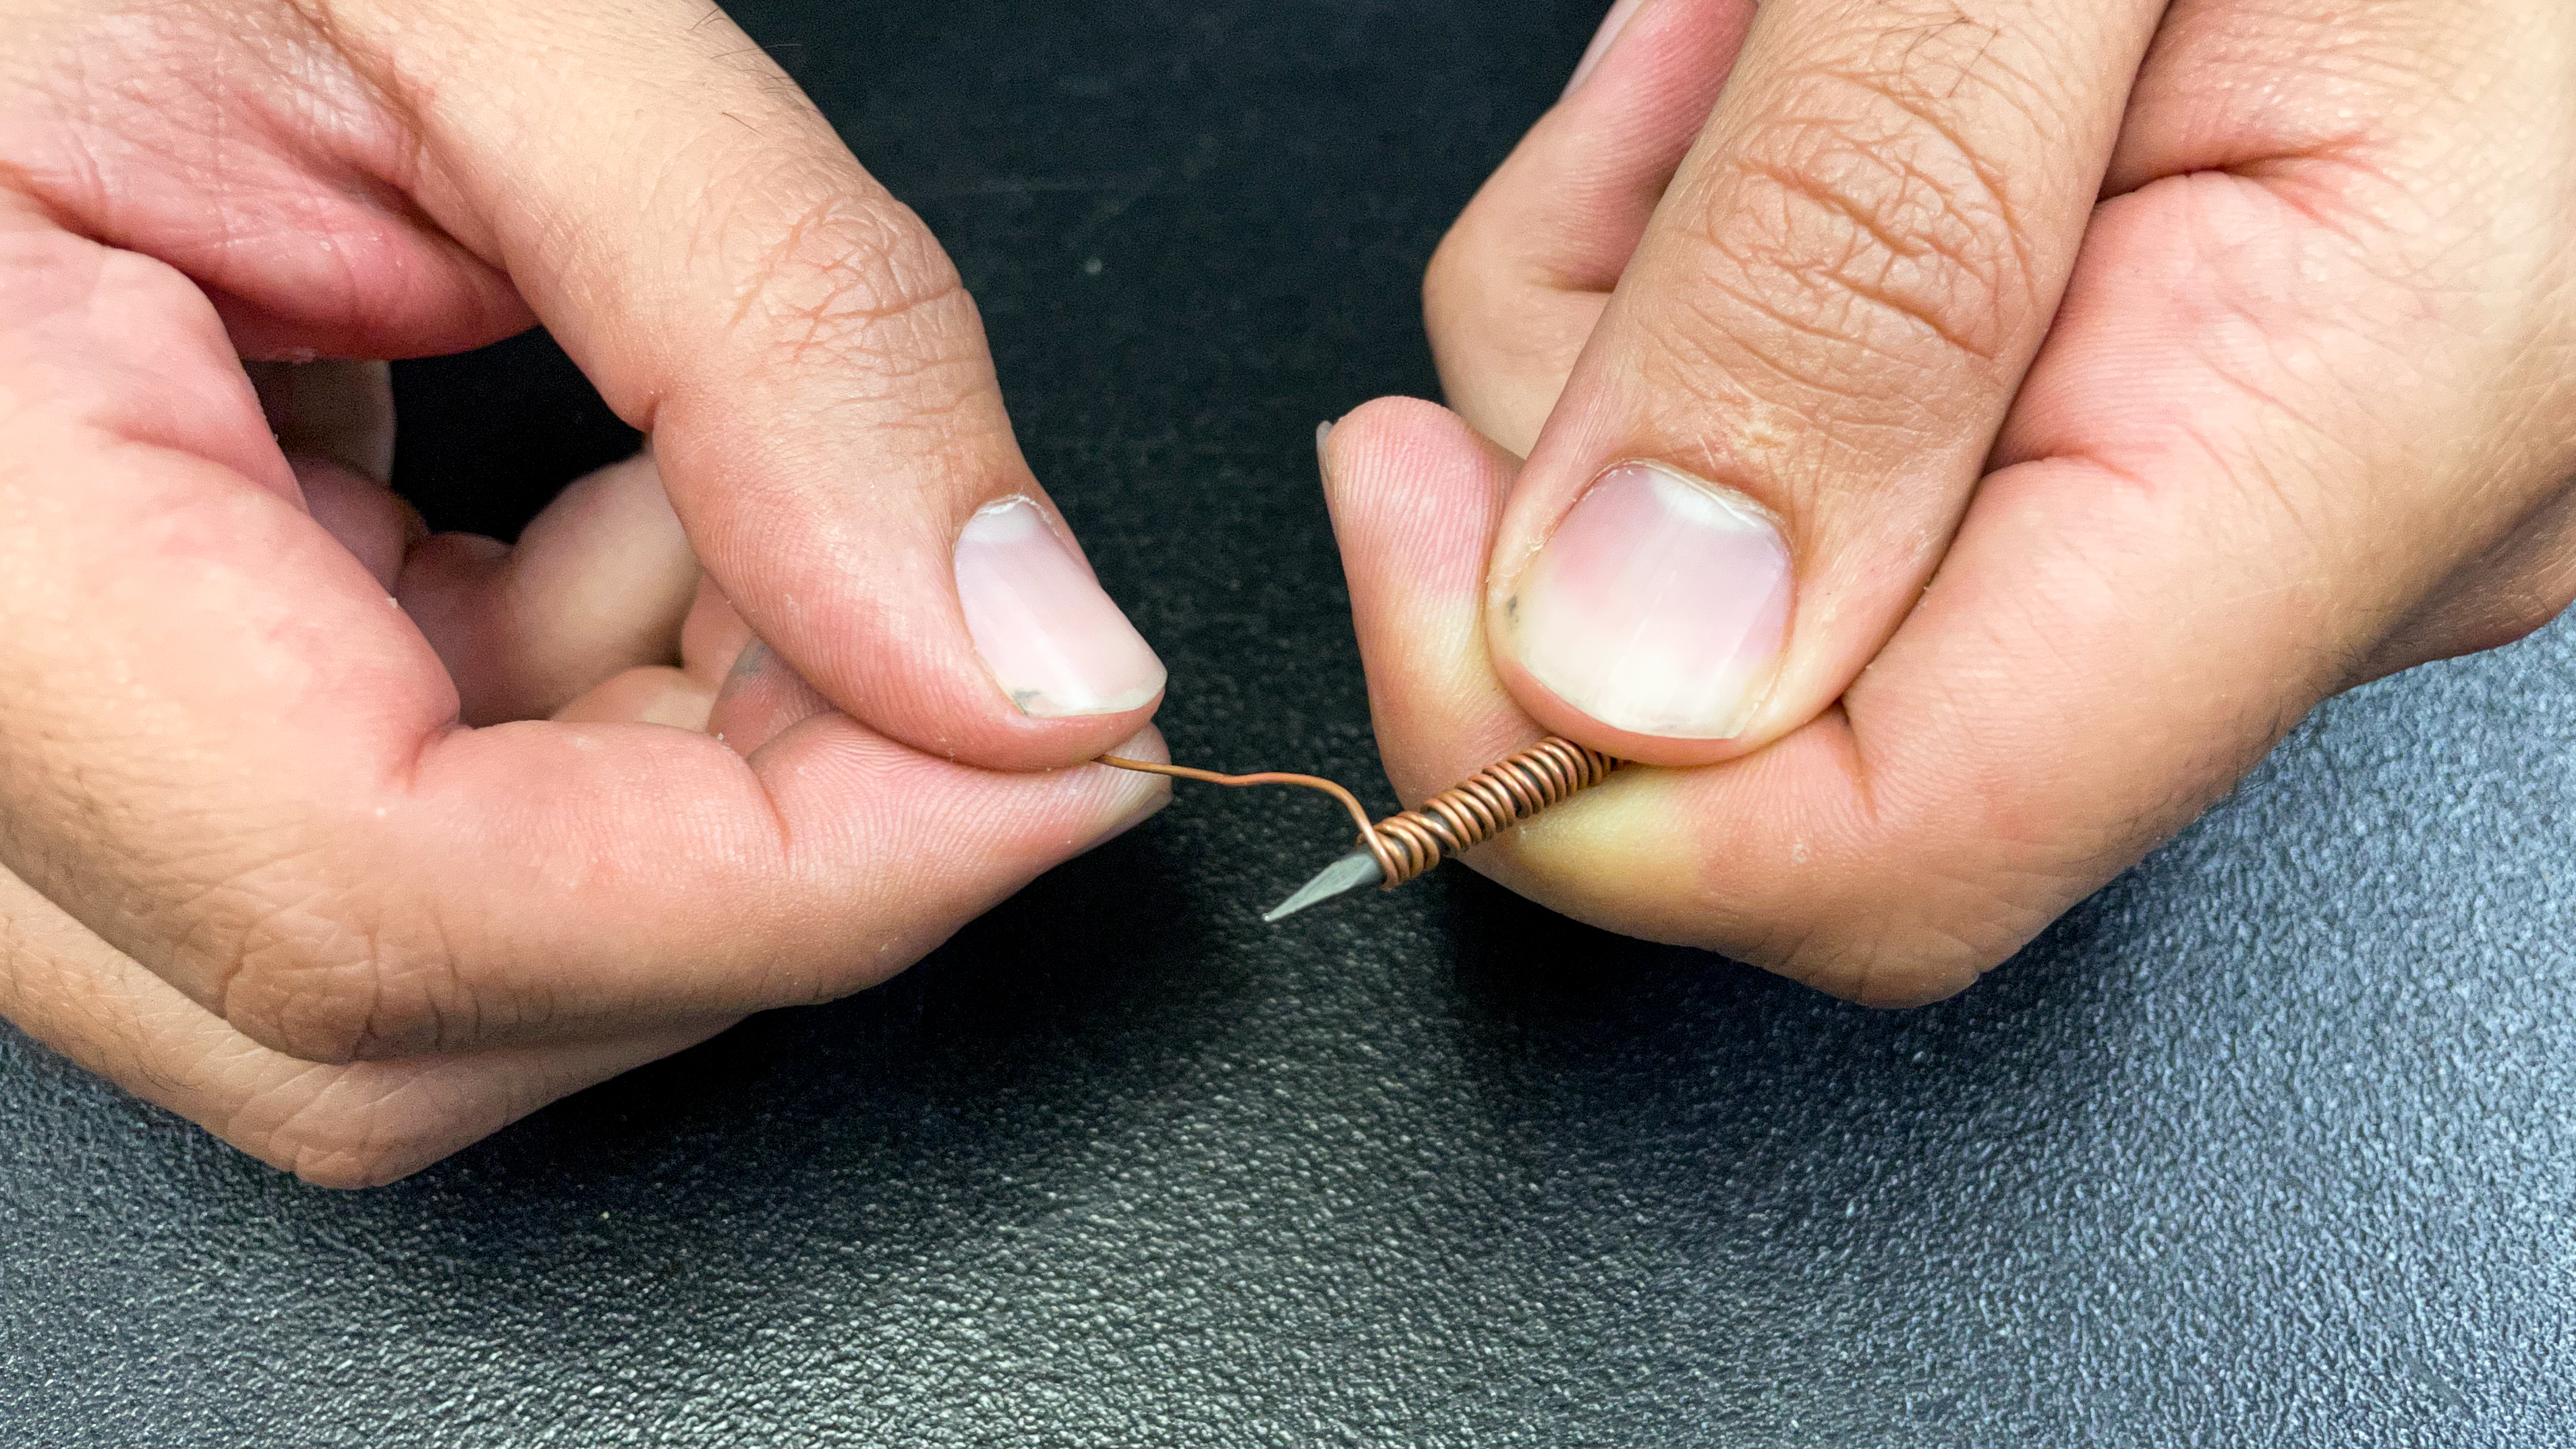 A person wraps a piece of wire tightly around a small nail.